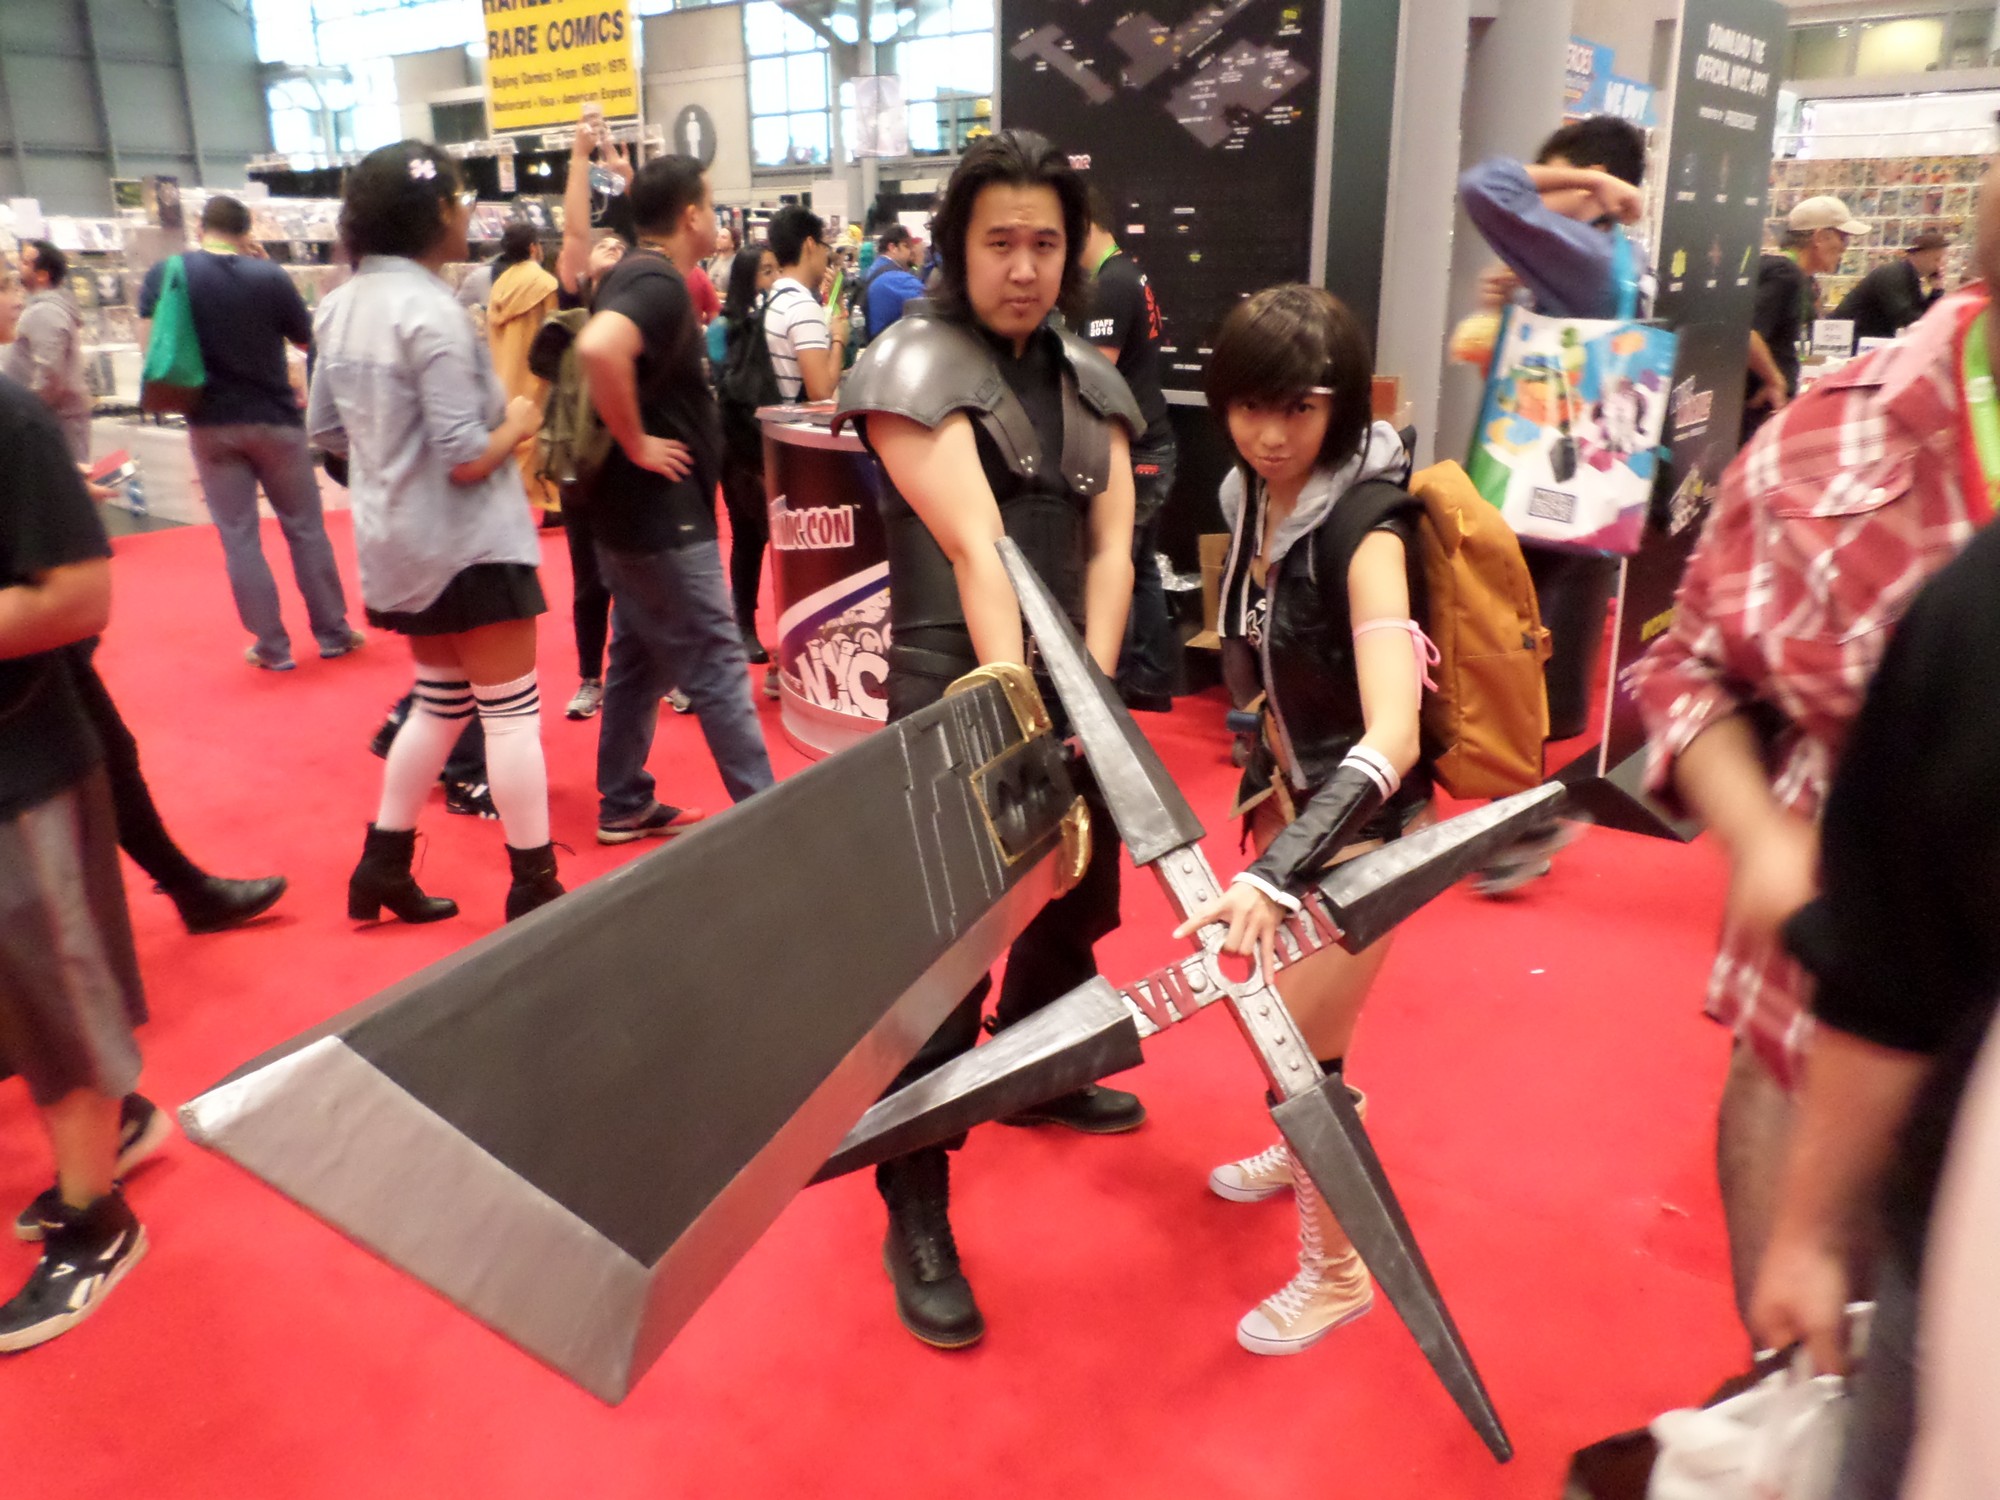 NYCC 2015 Day 1 Coverage 6